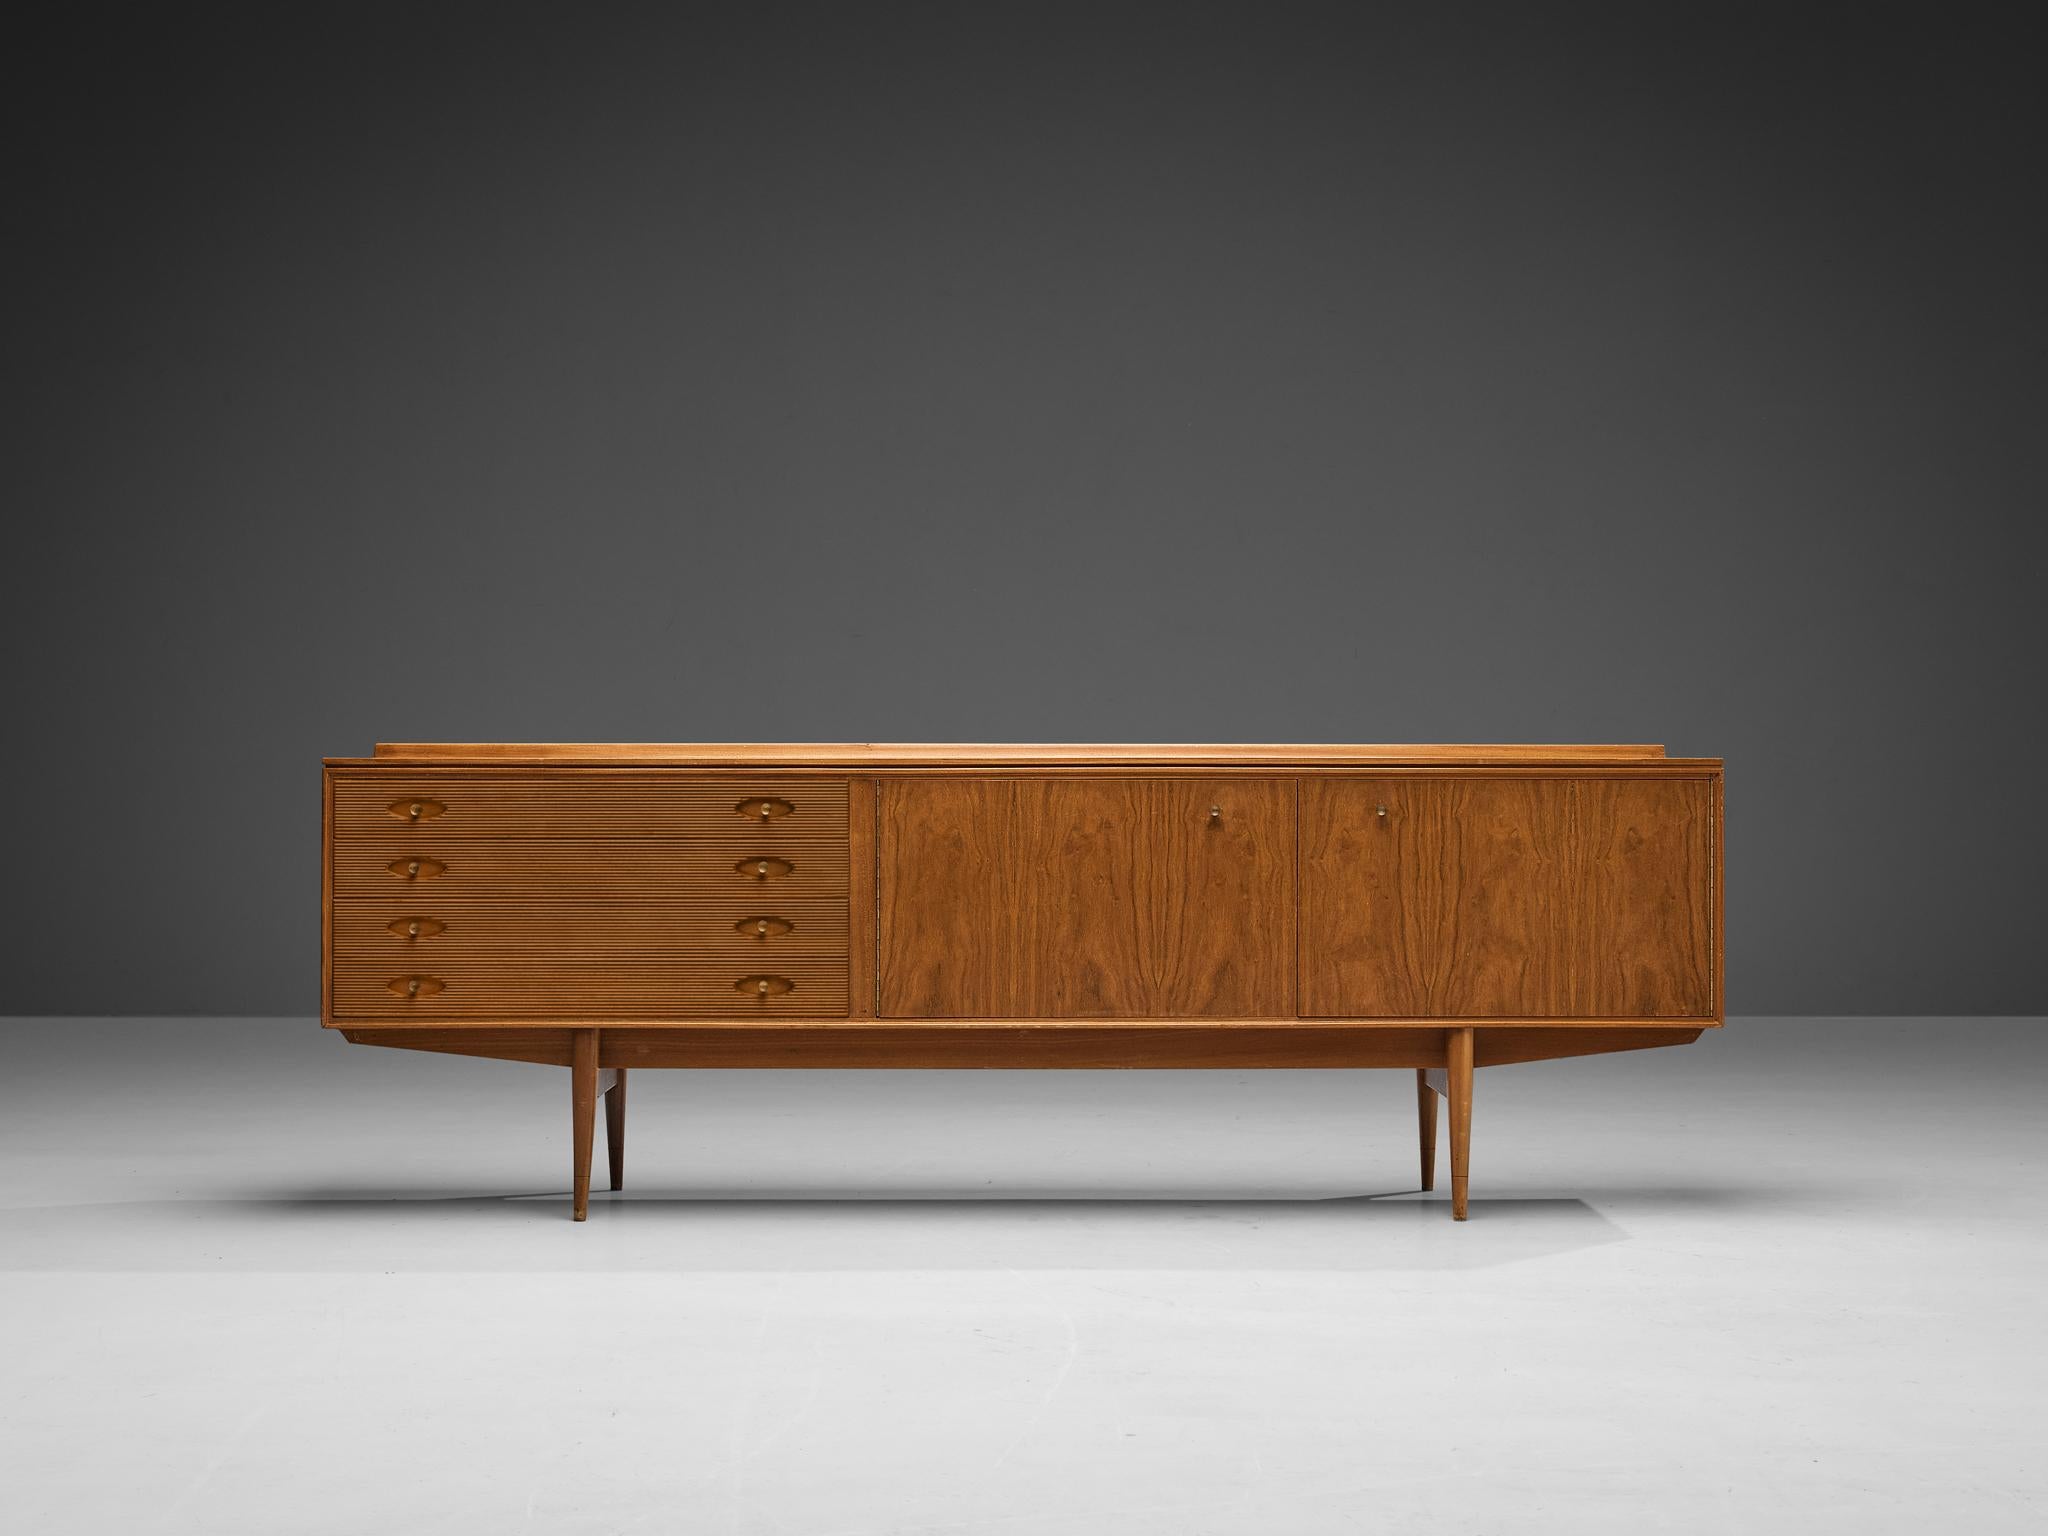 Robert Heritage for Archie Shine, sideboard ‘Hamilton’, walnut, brass, United Kingdom, 1957

This beautifully designed piece won a coveted Design award selected by the British Design Council ‘Designs of the Year’, together with twenty other designs,